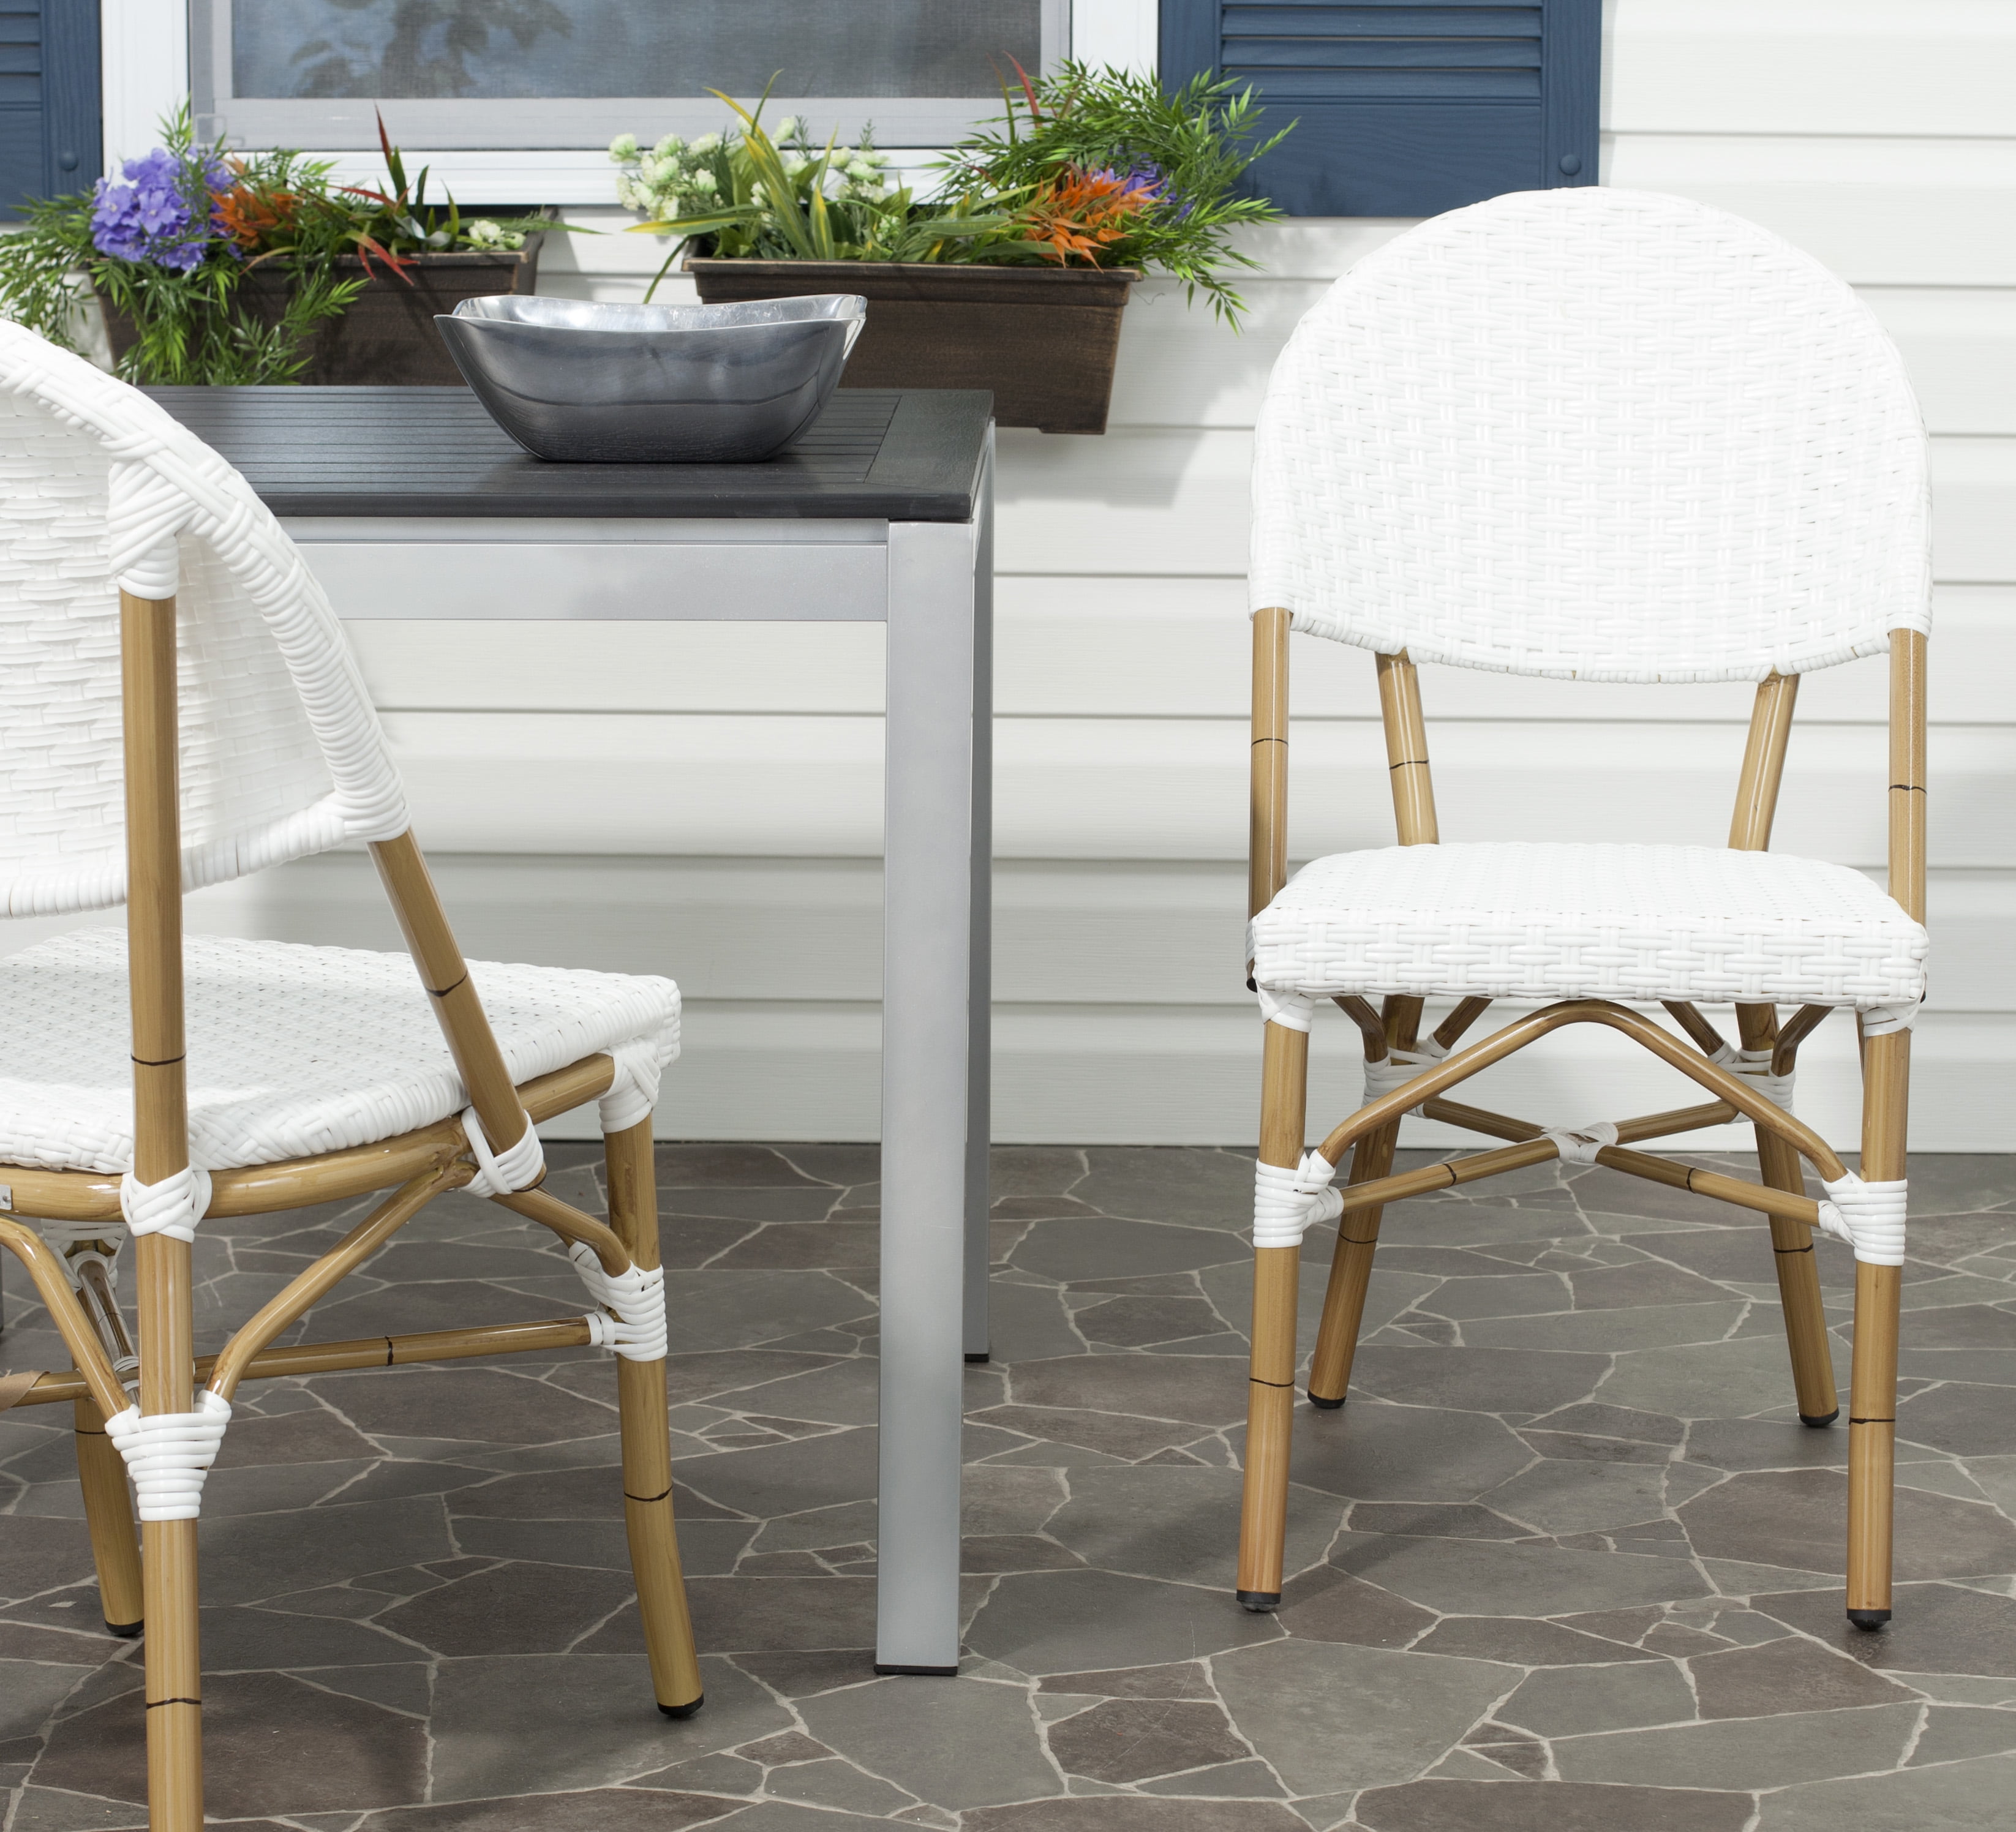 Safavieh Barrow Outdoor Patio Stacking Chair, Set of 2 - Off White ...